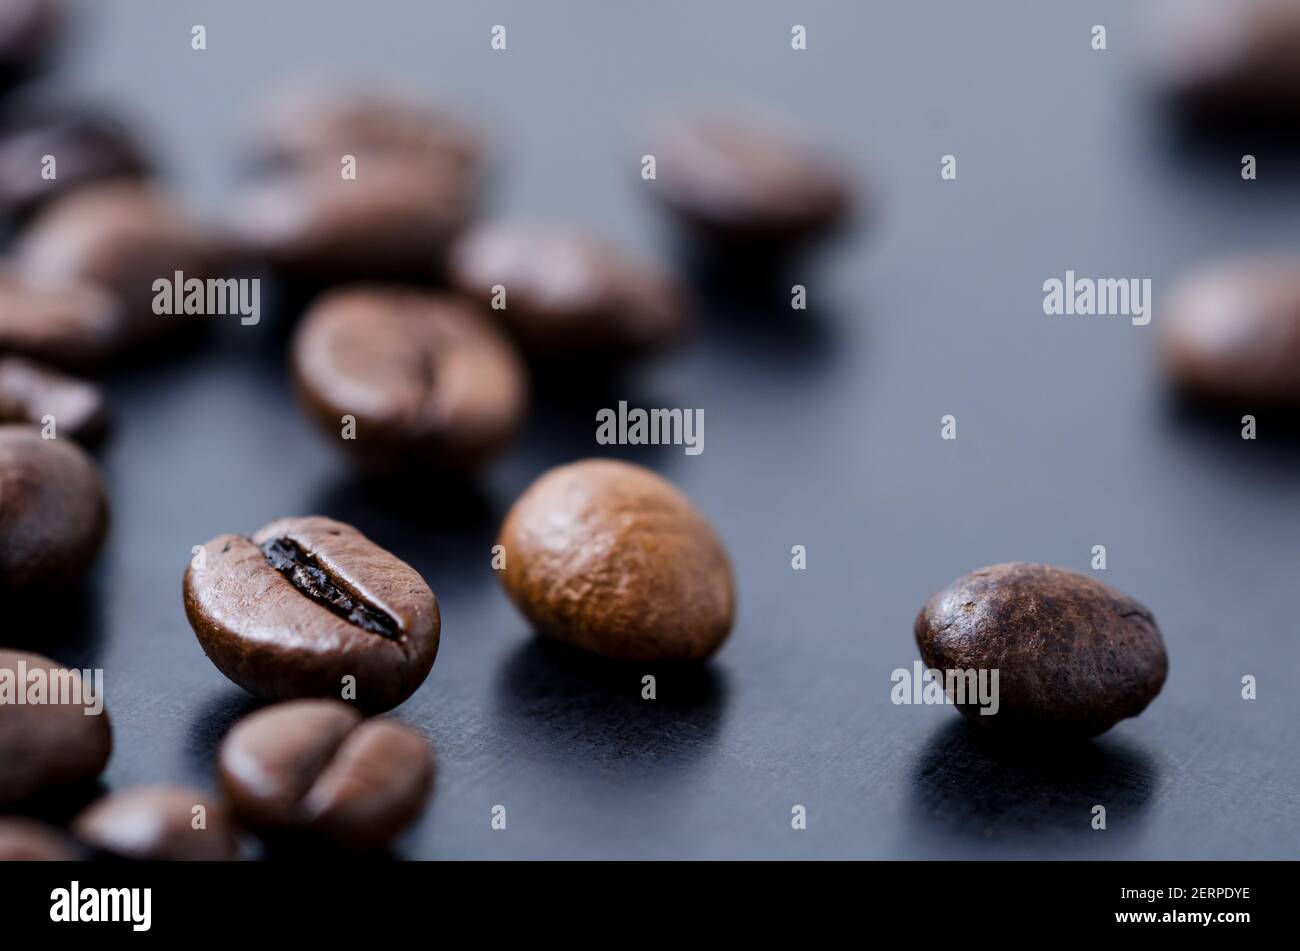 Loose roasted espresso coffee beans on dark background, close-up, flat lay view from above, still life, I love coffee concept Stock Photo